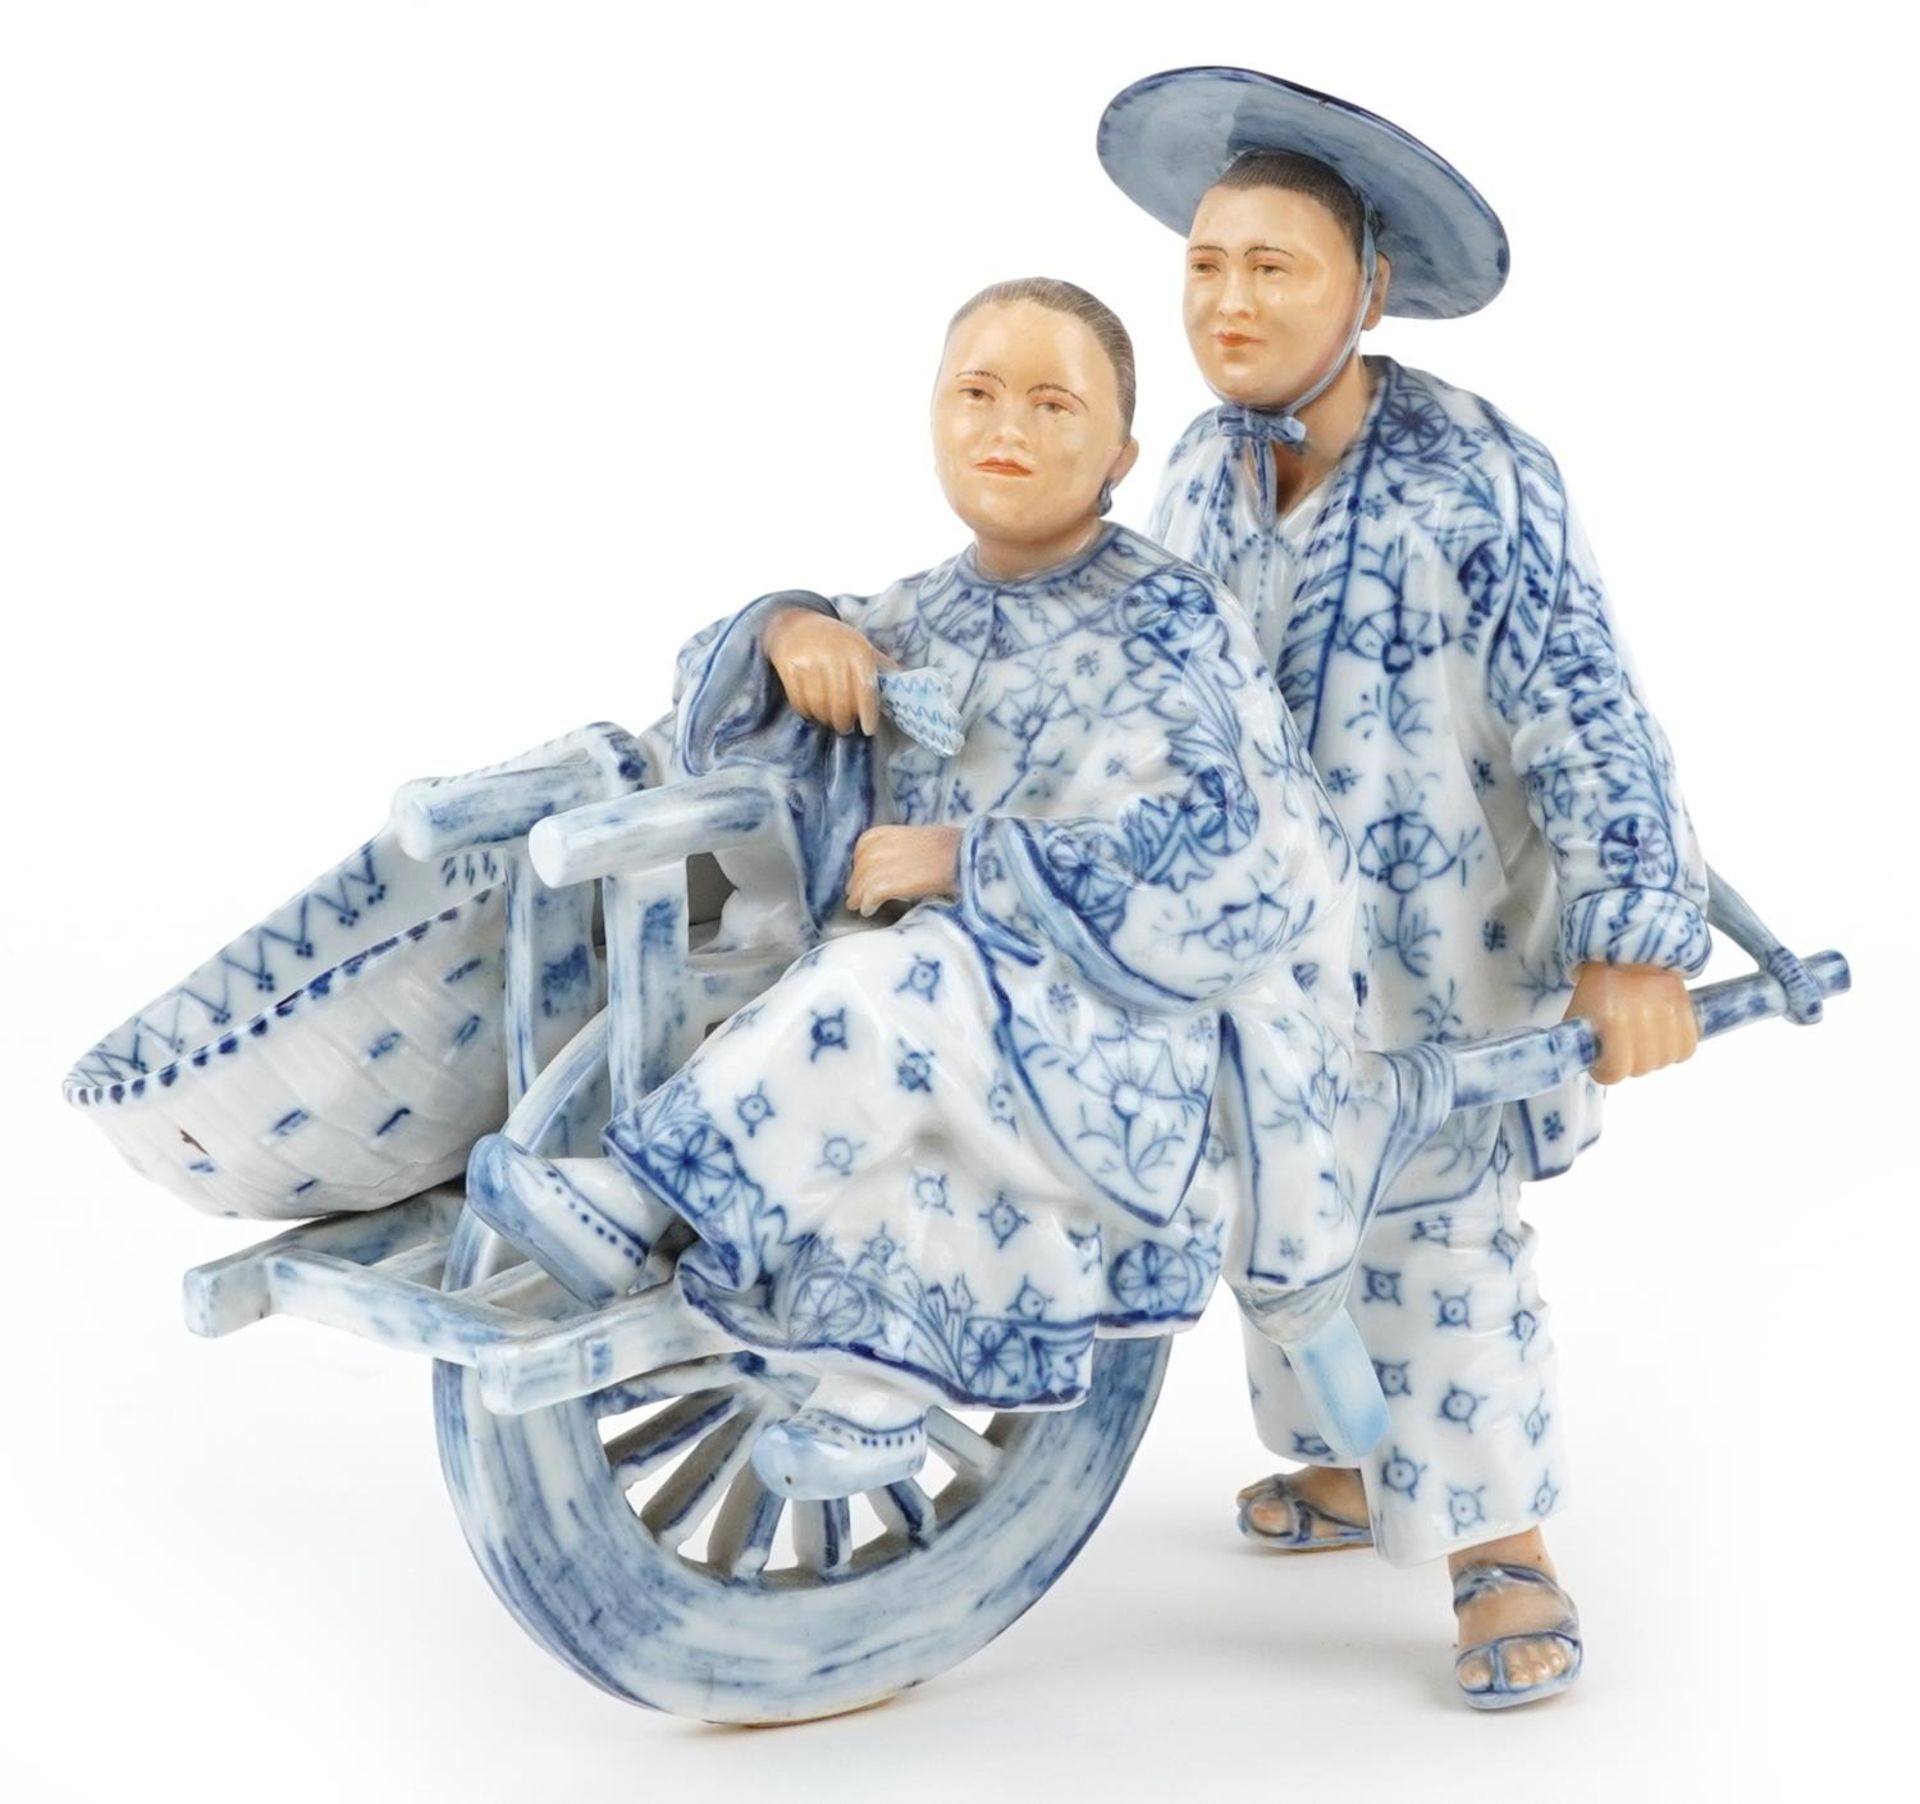 19th century European porcelain sweetmeat dish in the form of a Chinaman with rickshaw